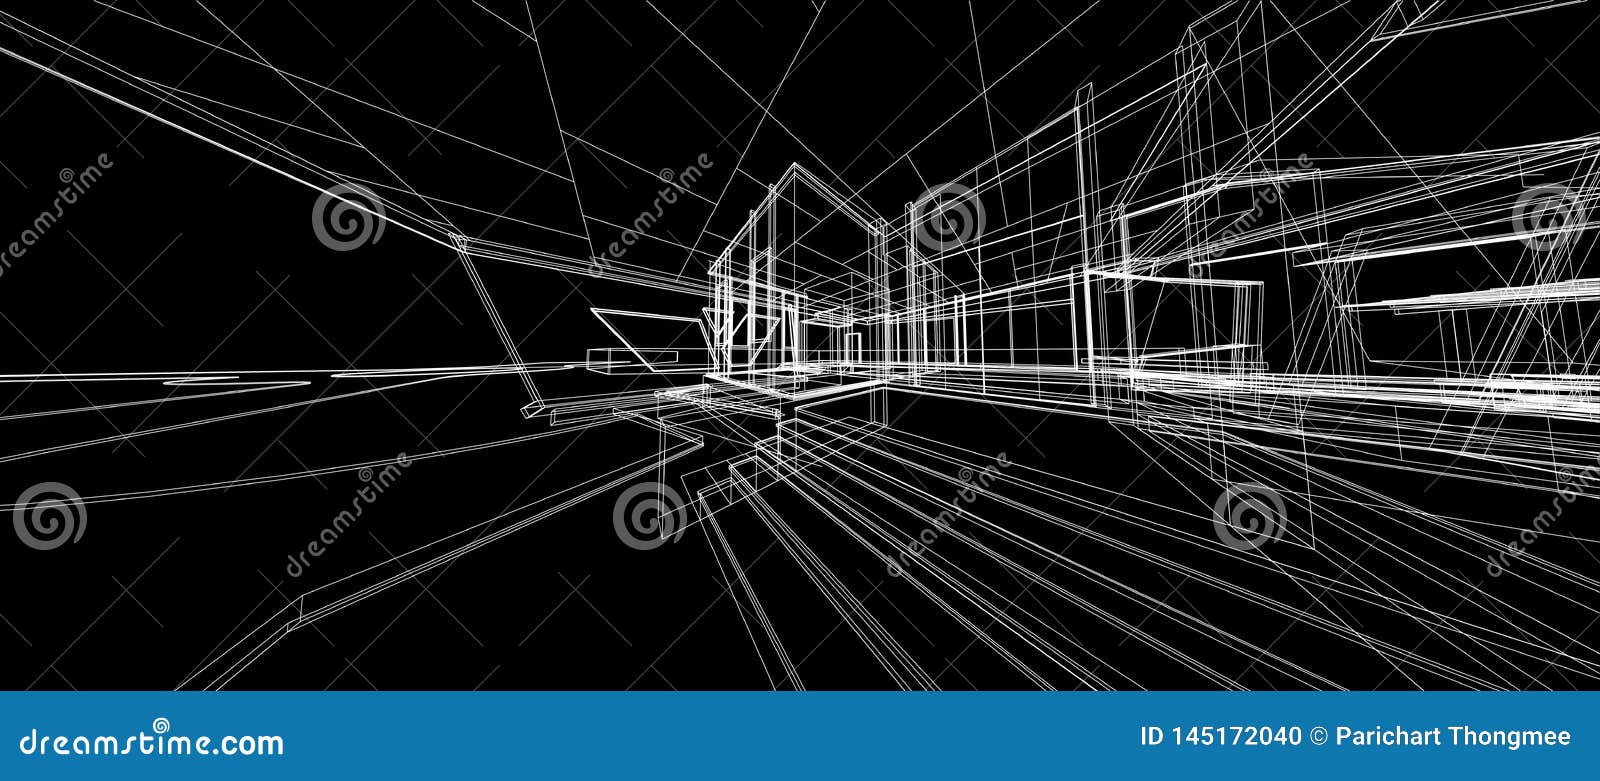 Architecture Design Concept 3d Perspective Wire Frame Rendering Black  Background Stock Illustration - Illustration of plan, architectural:  145172040